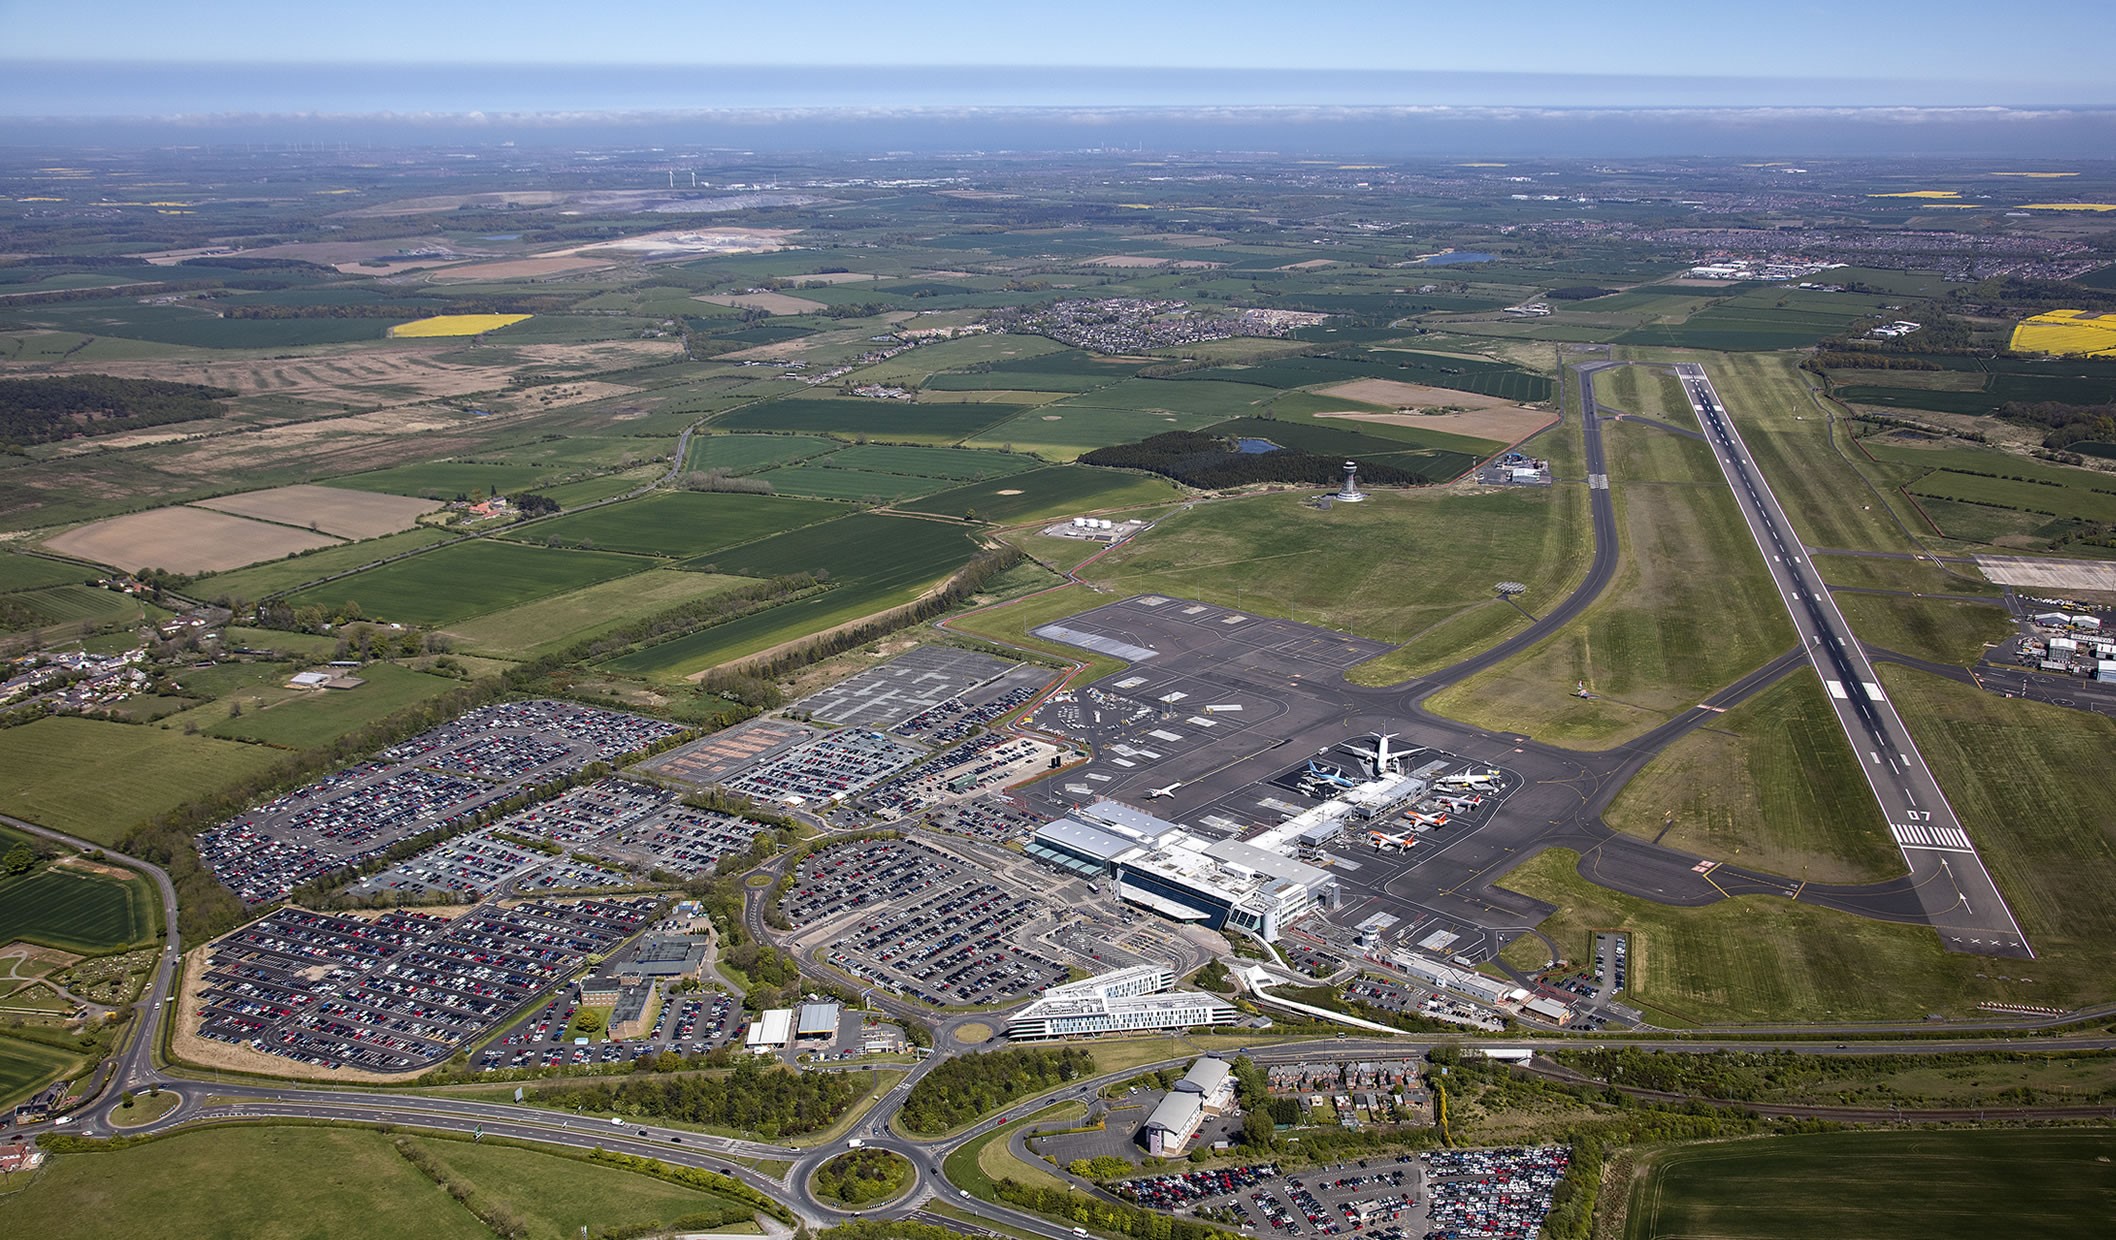 Newcastle International Airport has provided pick up and drop off facilities, short and long stay parking, and a Meet and Greet service